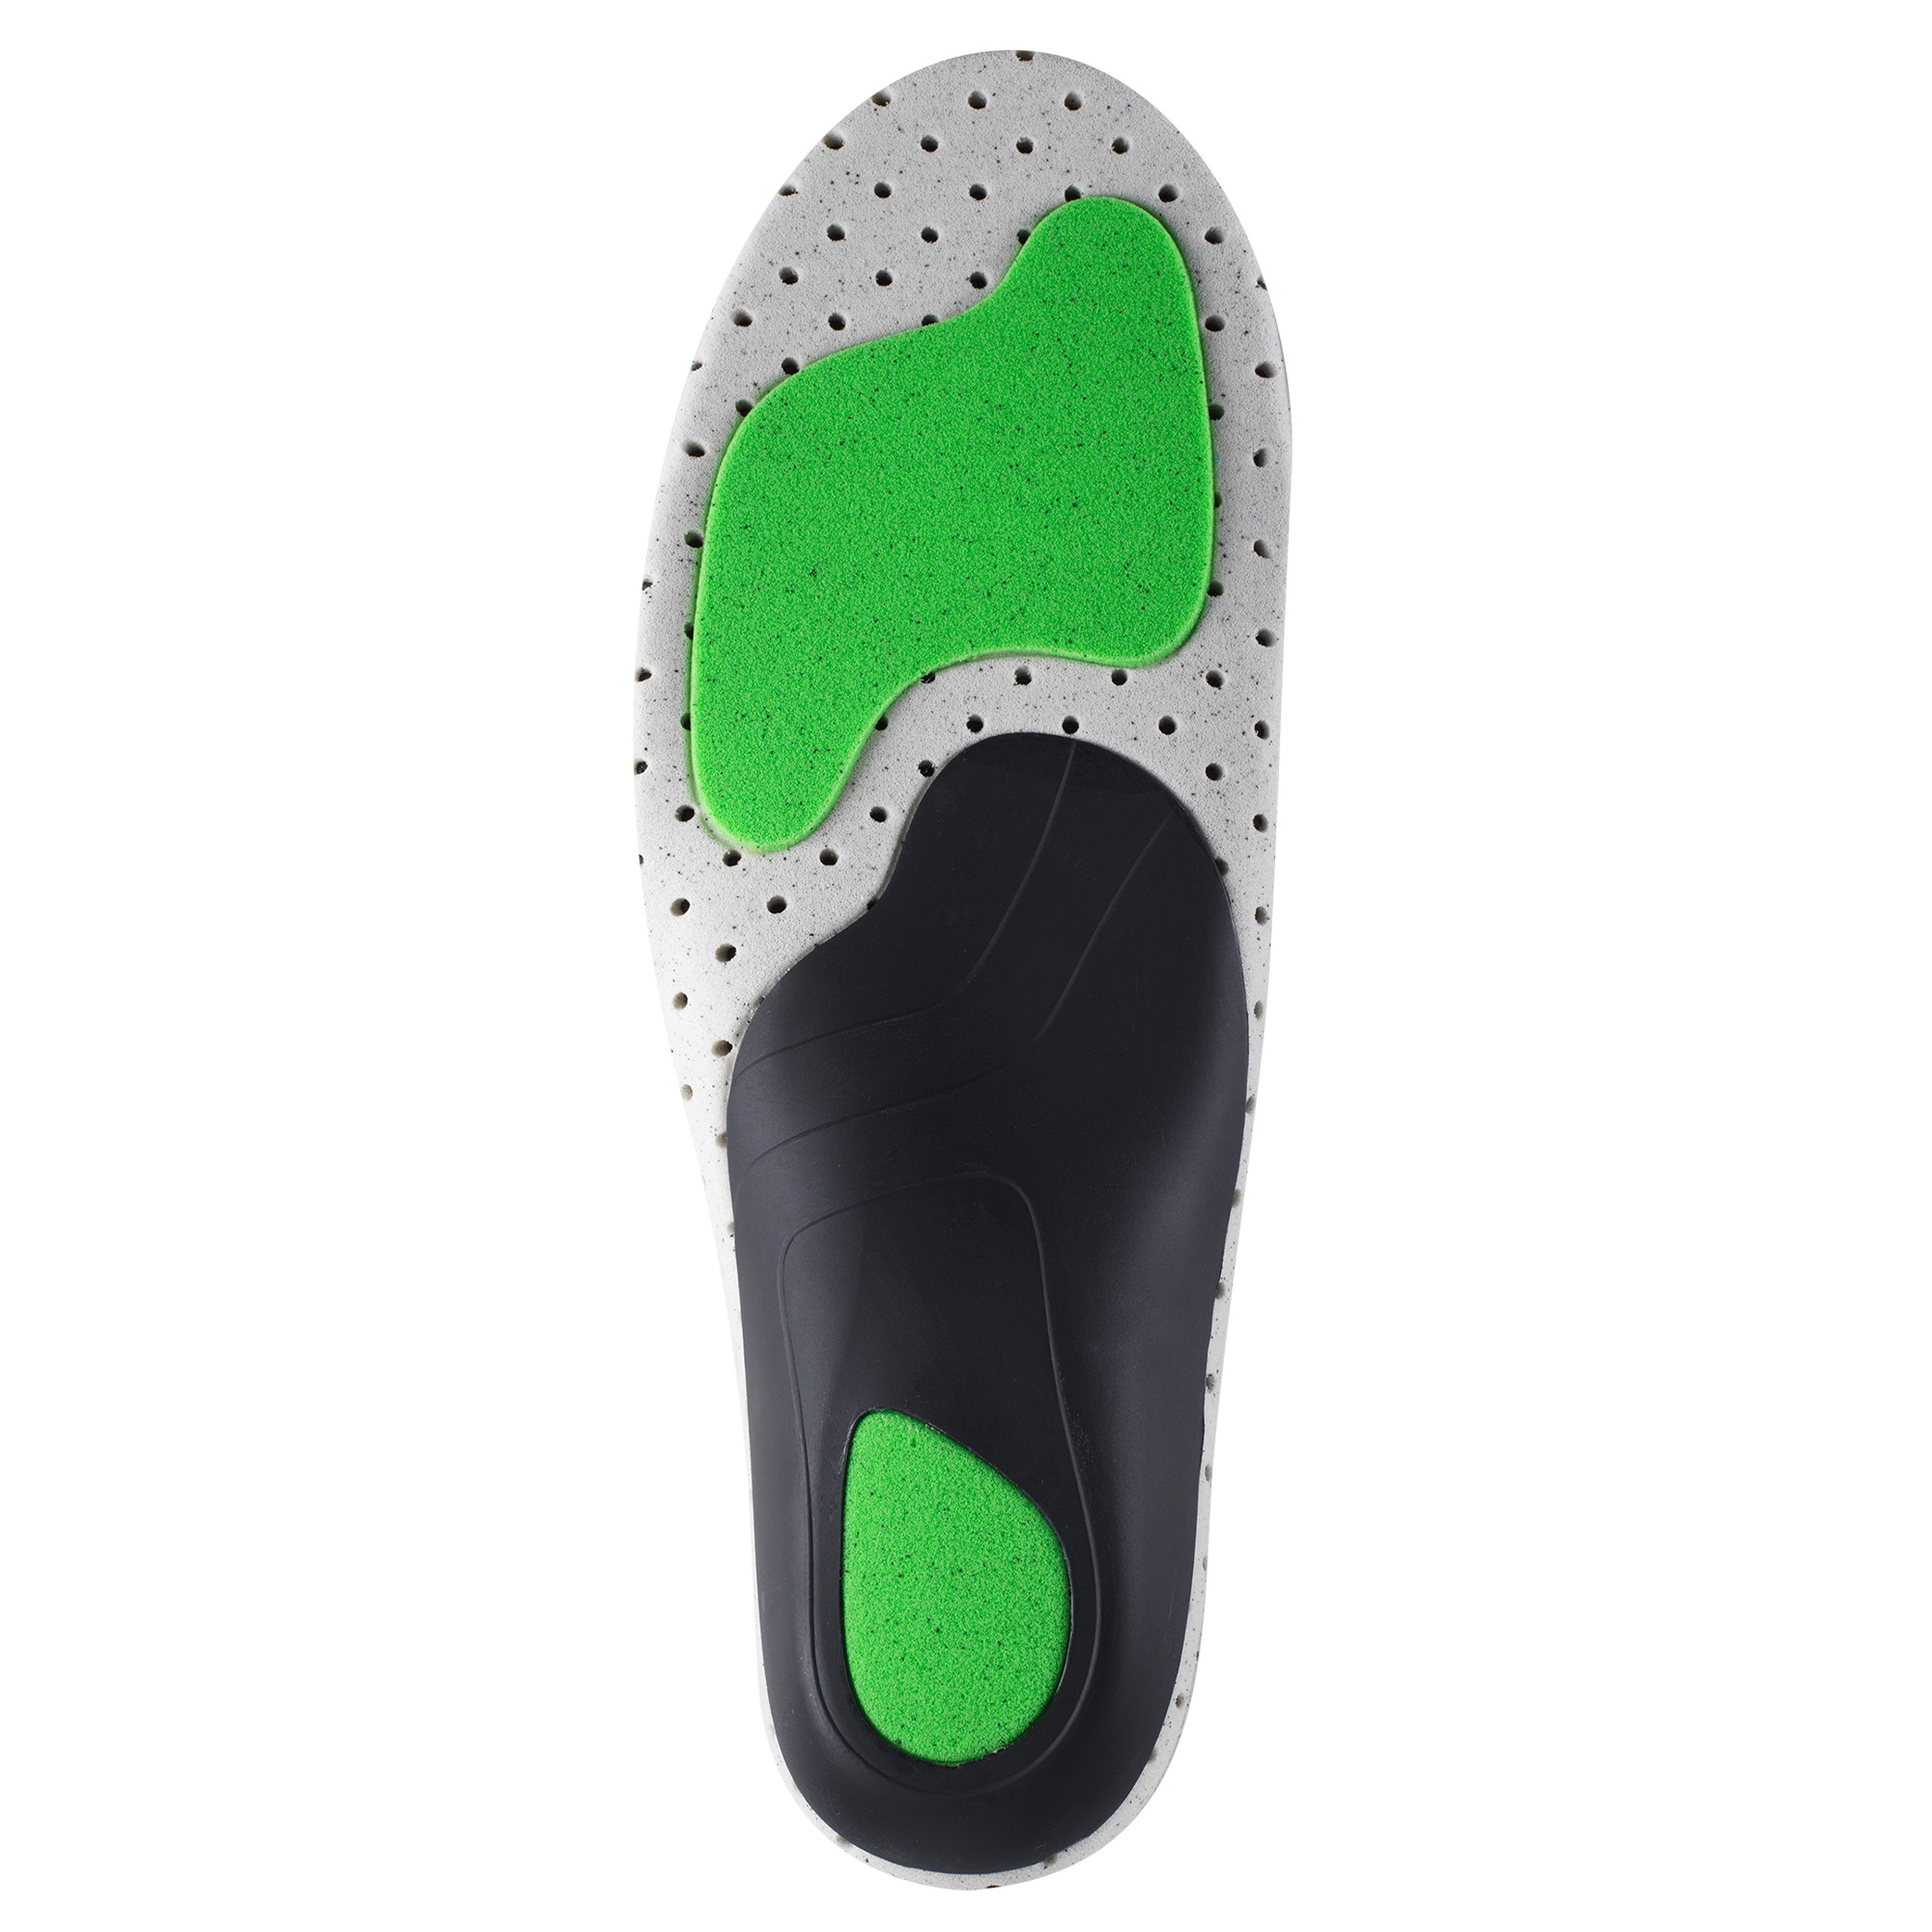 FITNESS Low Arch insoles